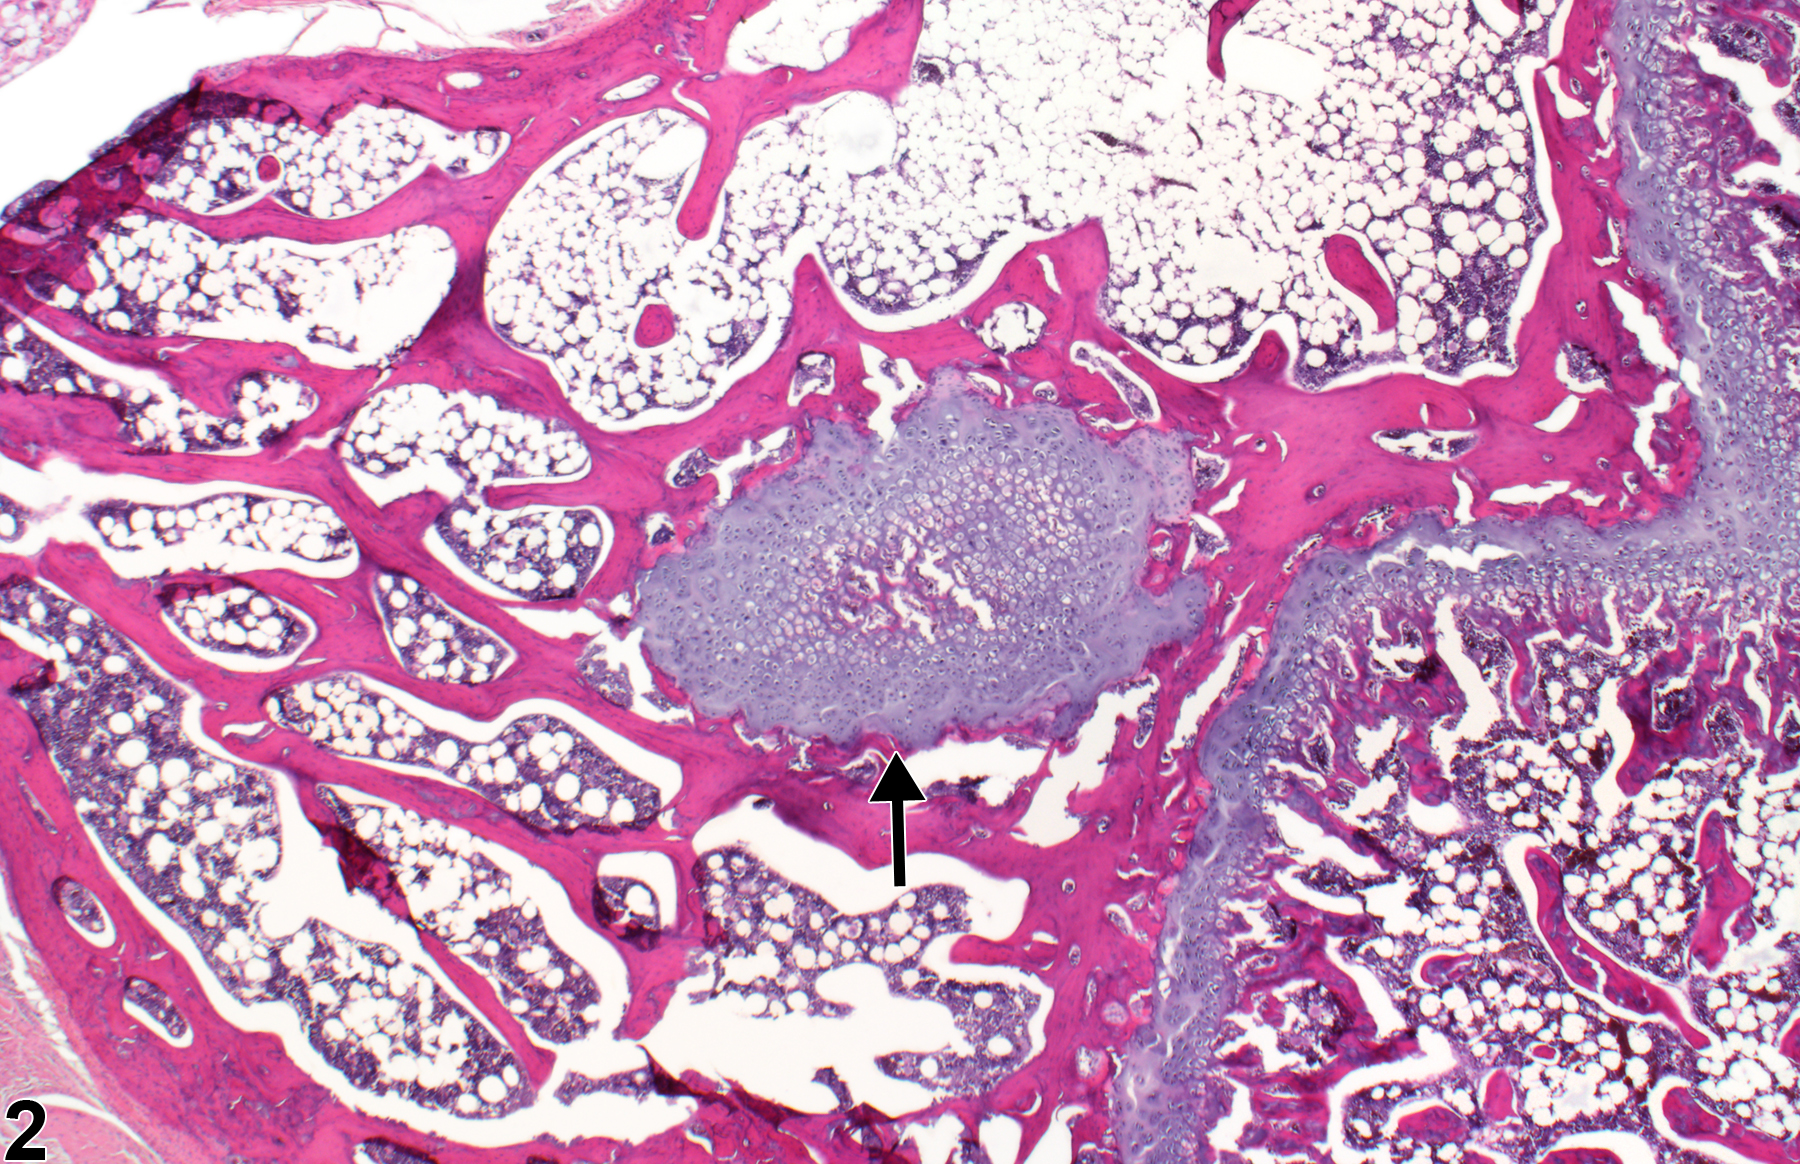 Image of physeal dysplasia in the bone from a male F344/N rat in a subchronic study